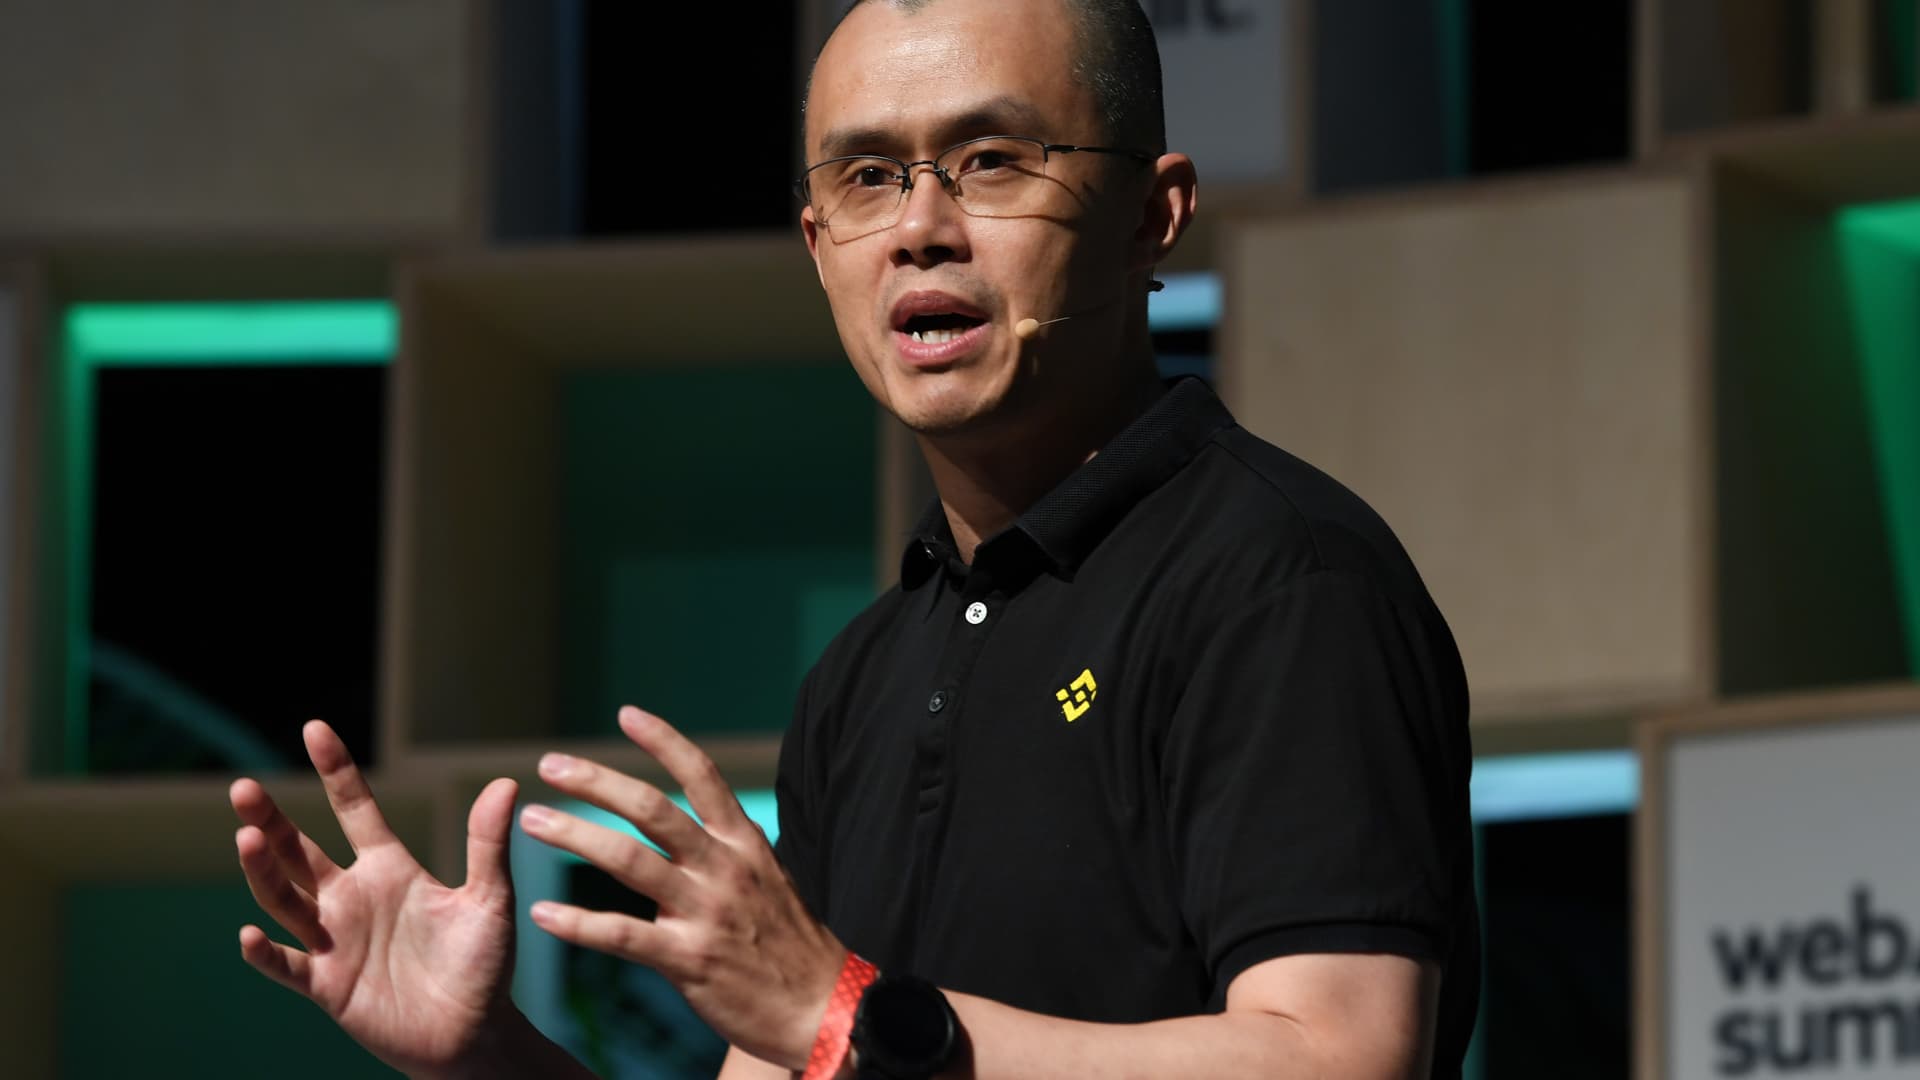 Binance could lay off thousands as company buckles down for DOJ probe, source says